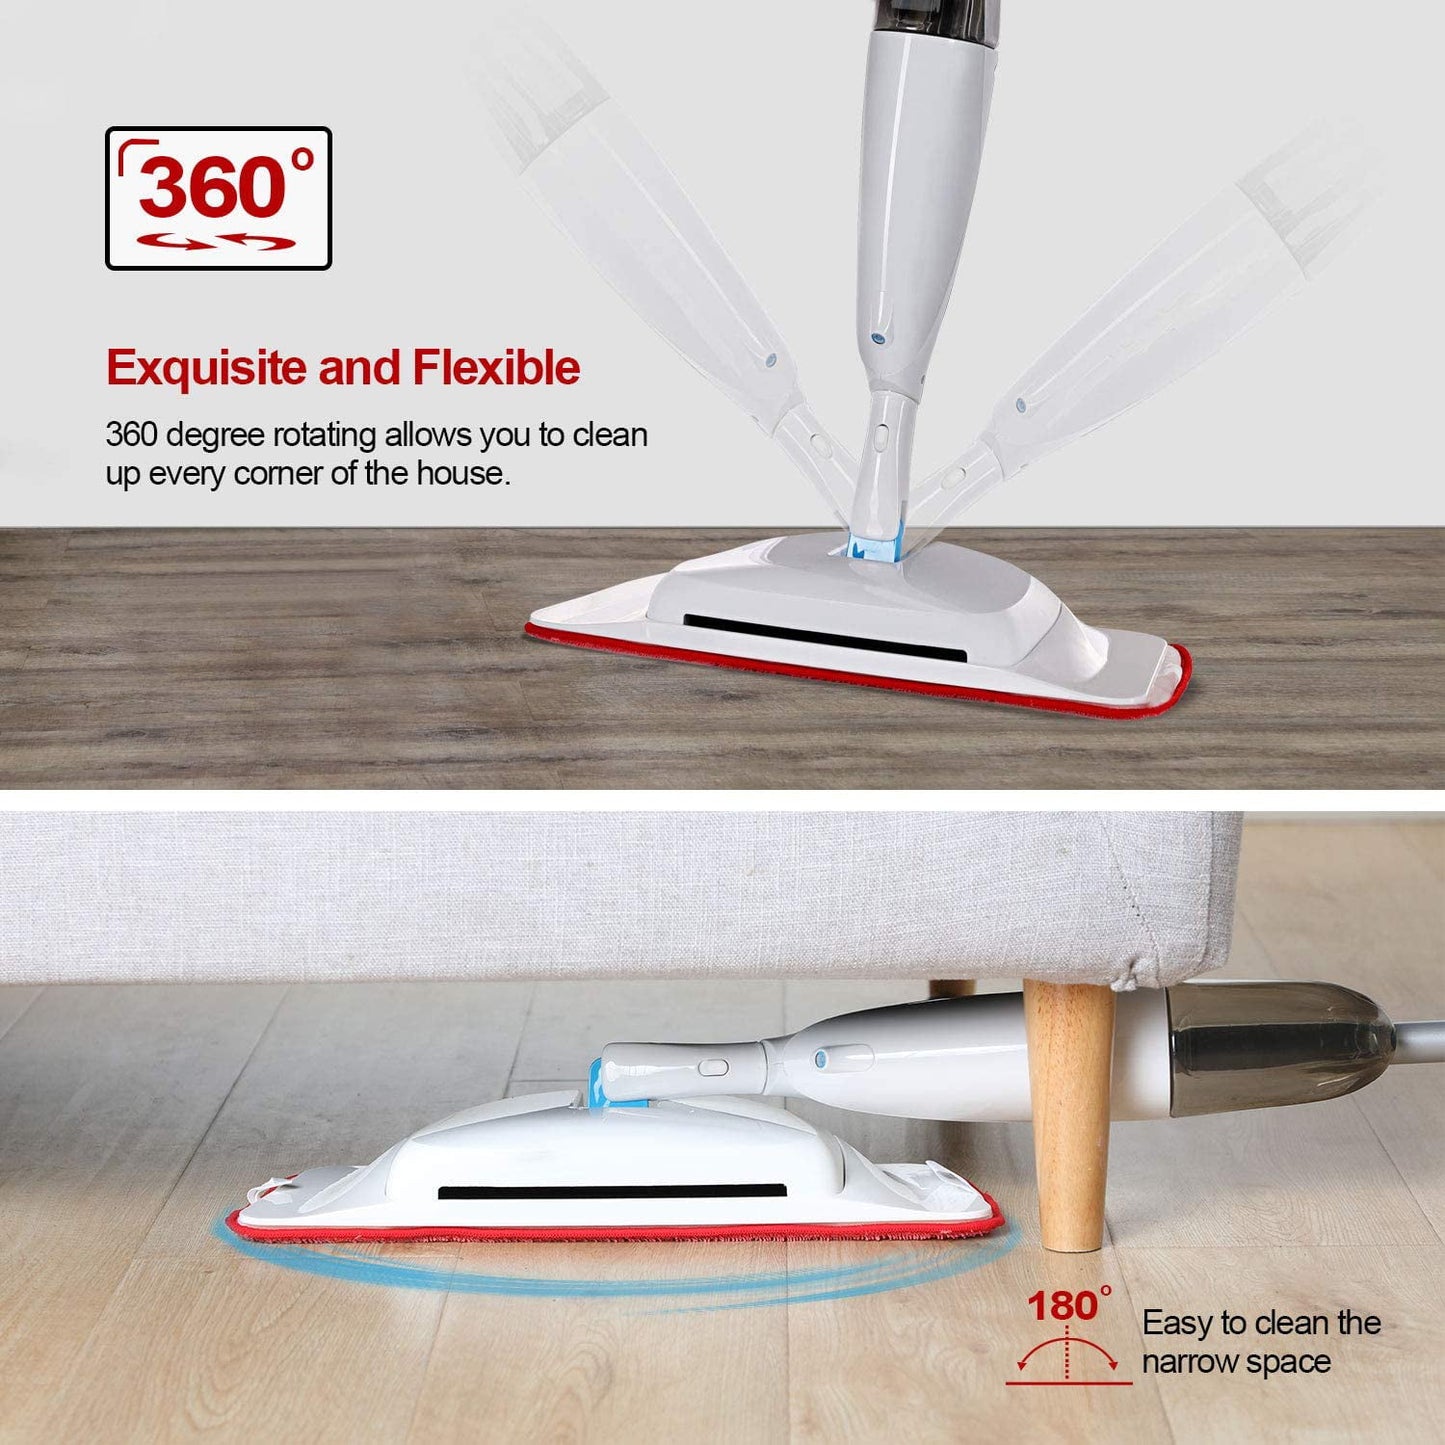 Eyliden Multifunctional Spray Mop & Sweeper Kit with 4 Microfiber Mop Pads,Dust Mops for Hardwood Laminate Tiles Wood Ceramic Floor Cleaning Wet and Dry